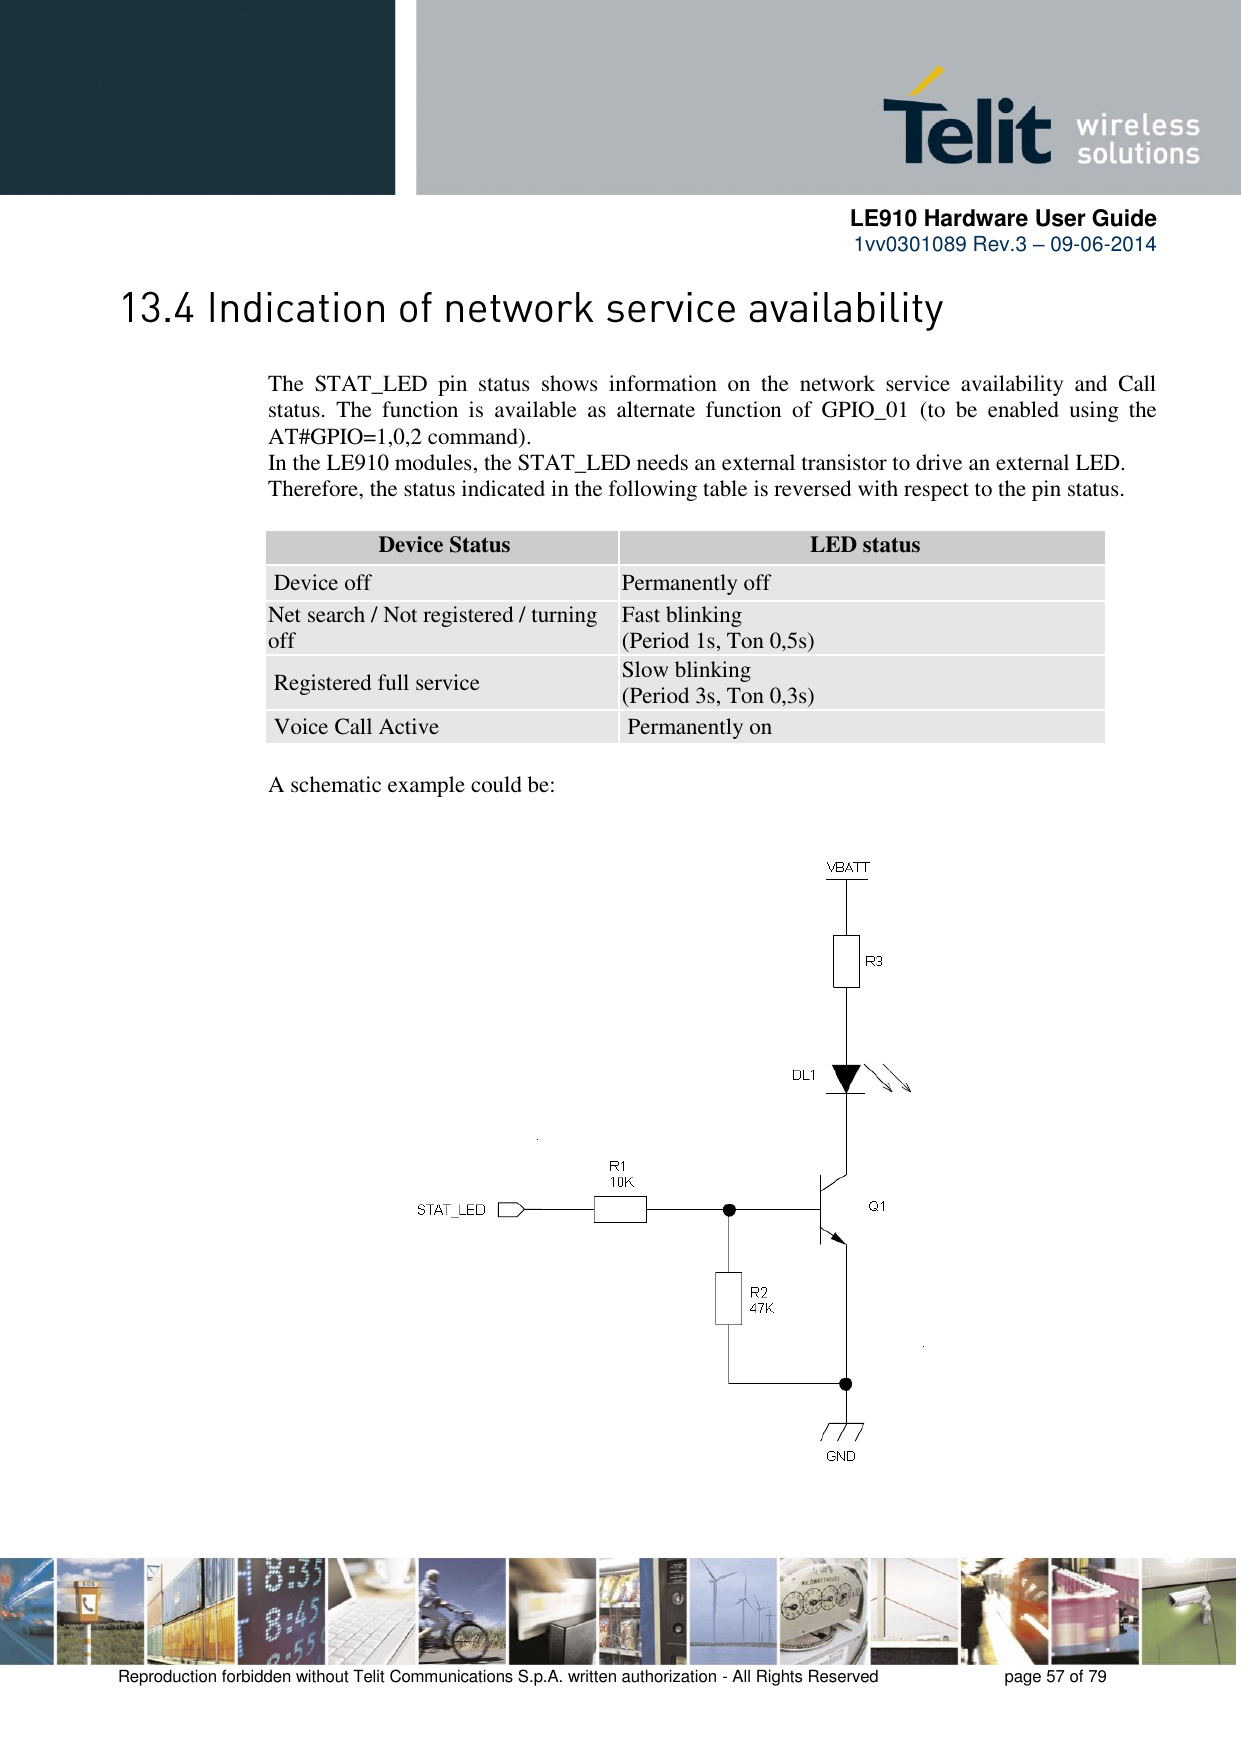      LE910 Hardware User Guide 1vv0301089 Rev.3 – 09-06-2014    Reproduction forbidden without Telit Communications S.p.A. written authorization - All Rights Reserved    page 57 of 79   The  STAT_LED  pin  status  shows  information  on  the  network  service  availability  and  Call status.  The  function  is  available  as  alternate  function  of  GPIO_01  (to  be  enabled  using  the AT#GPIO=1,0,2 command). In the LE910 modules, the STAT_LED needs an external transistor to drive an external LED. Therefore, the status indicated in the following table is reversed with respect to the pin status.  Device Status LED status Device off Permanently off Net search / Not registered / turning off  Fast blinking  (Period 1s, Ton 0,5s)  Registered full service Slow blinking  (Period 3s, Ton 0,3s)  Voice Call Active Permanently on  A schematic example could be: 